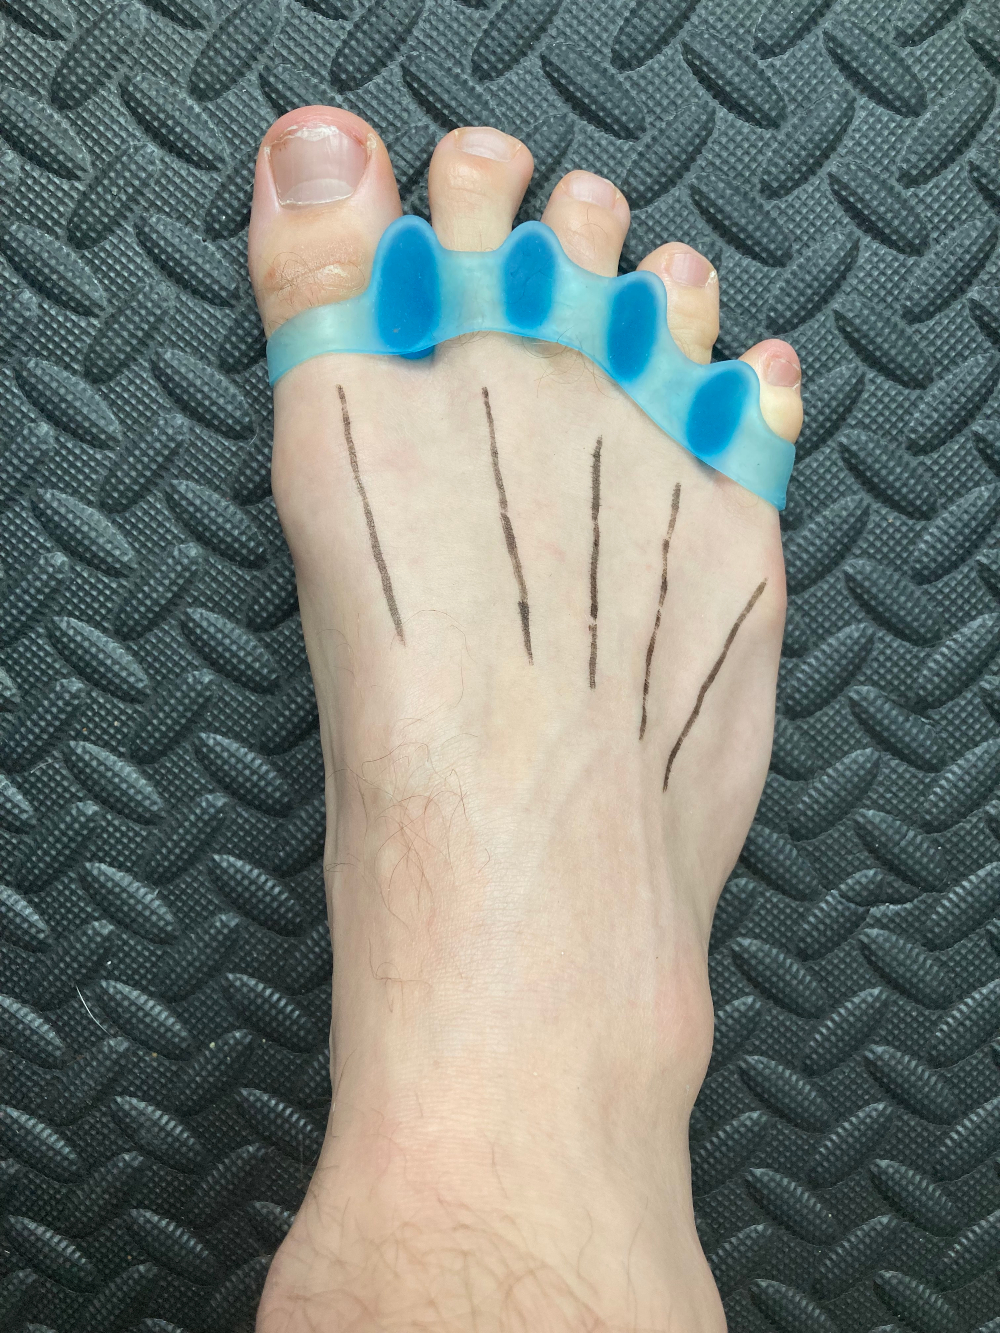 A Quick and Easy Test to See if Your Toes are in Natural Alignment